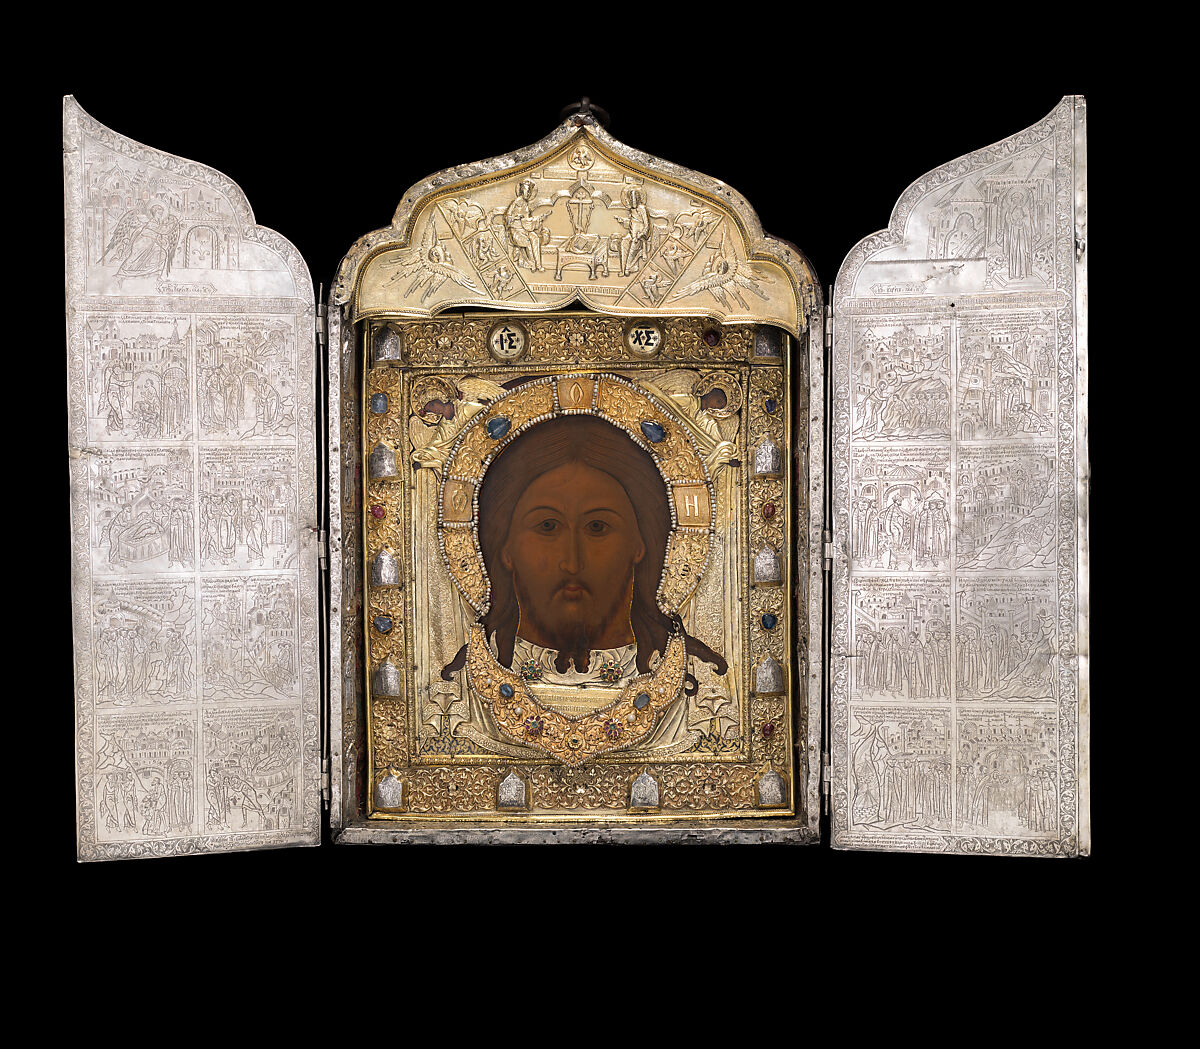 Triptych with the Mandylion, The Kremlin Armory Workshops, Moscow, Silver, partly gilt, niello, enamel, sapphires, rubies, spinels, pearls, leather, silk velvet, oil paint, gesso, linen, mica, pig-skin, woods: Tilia cordata (basswood or linden), white oak, Russian, Moscow 